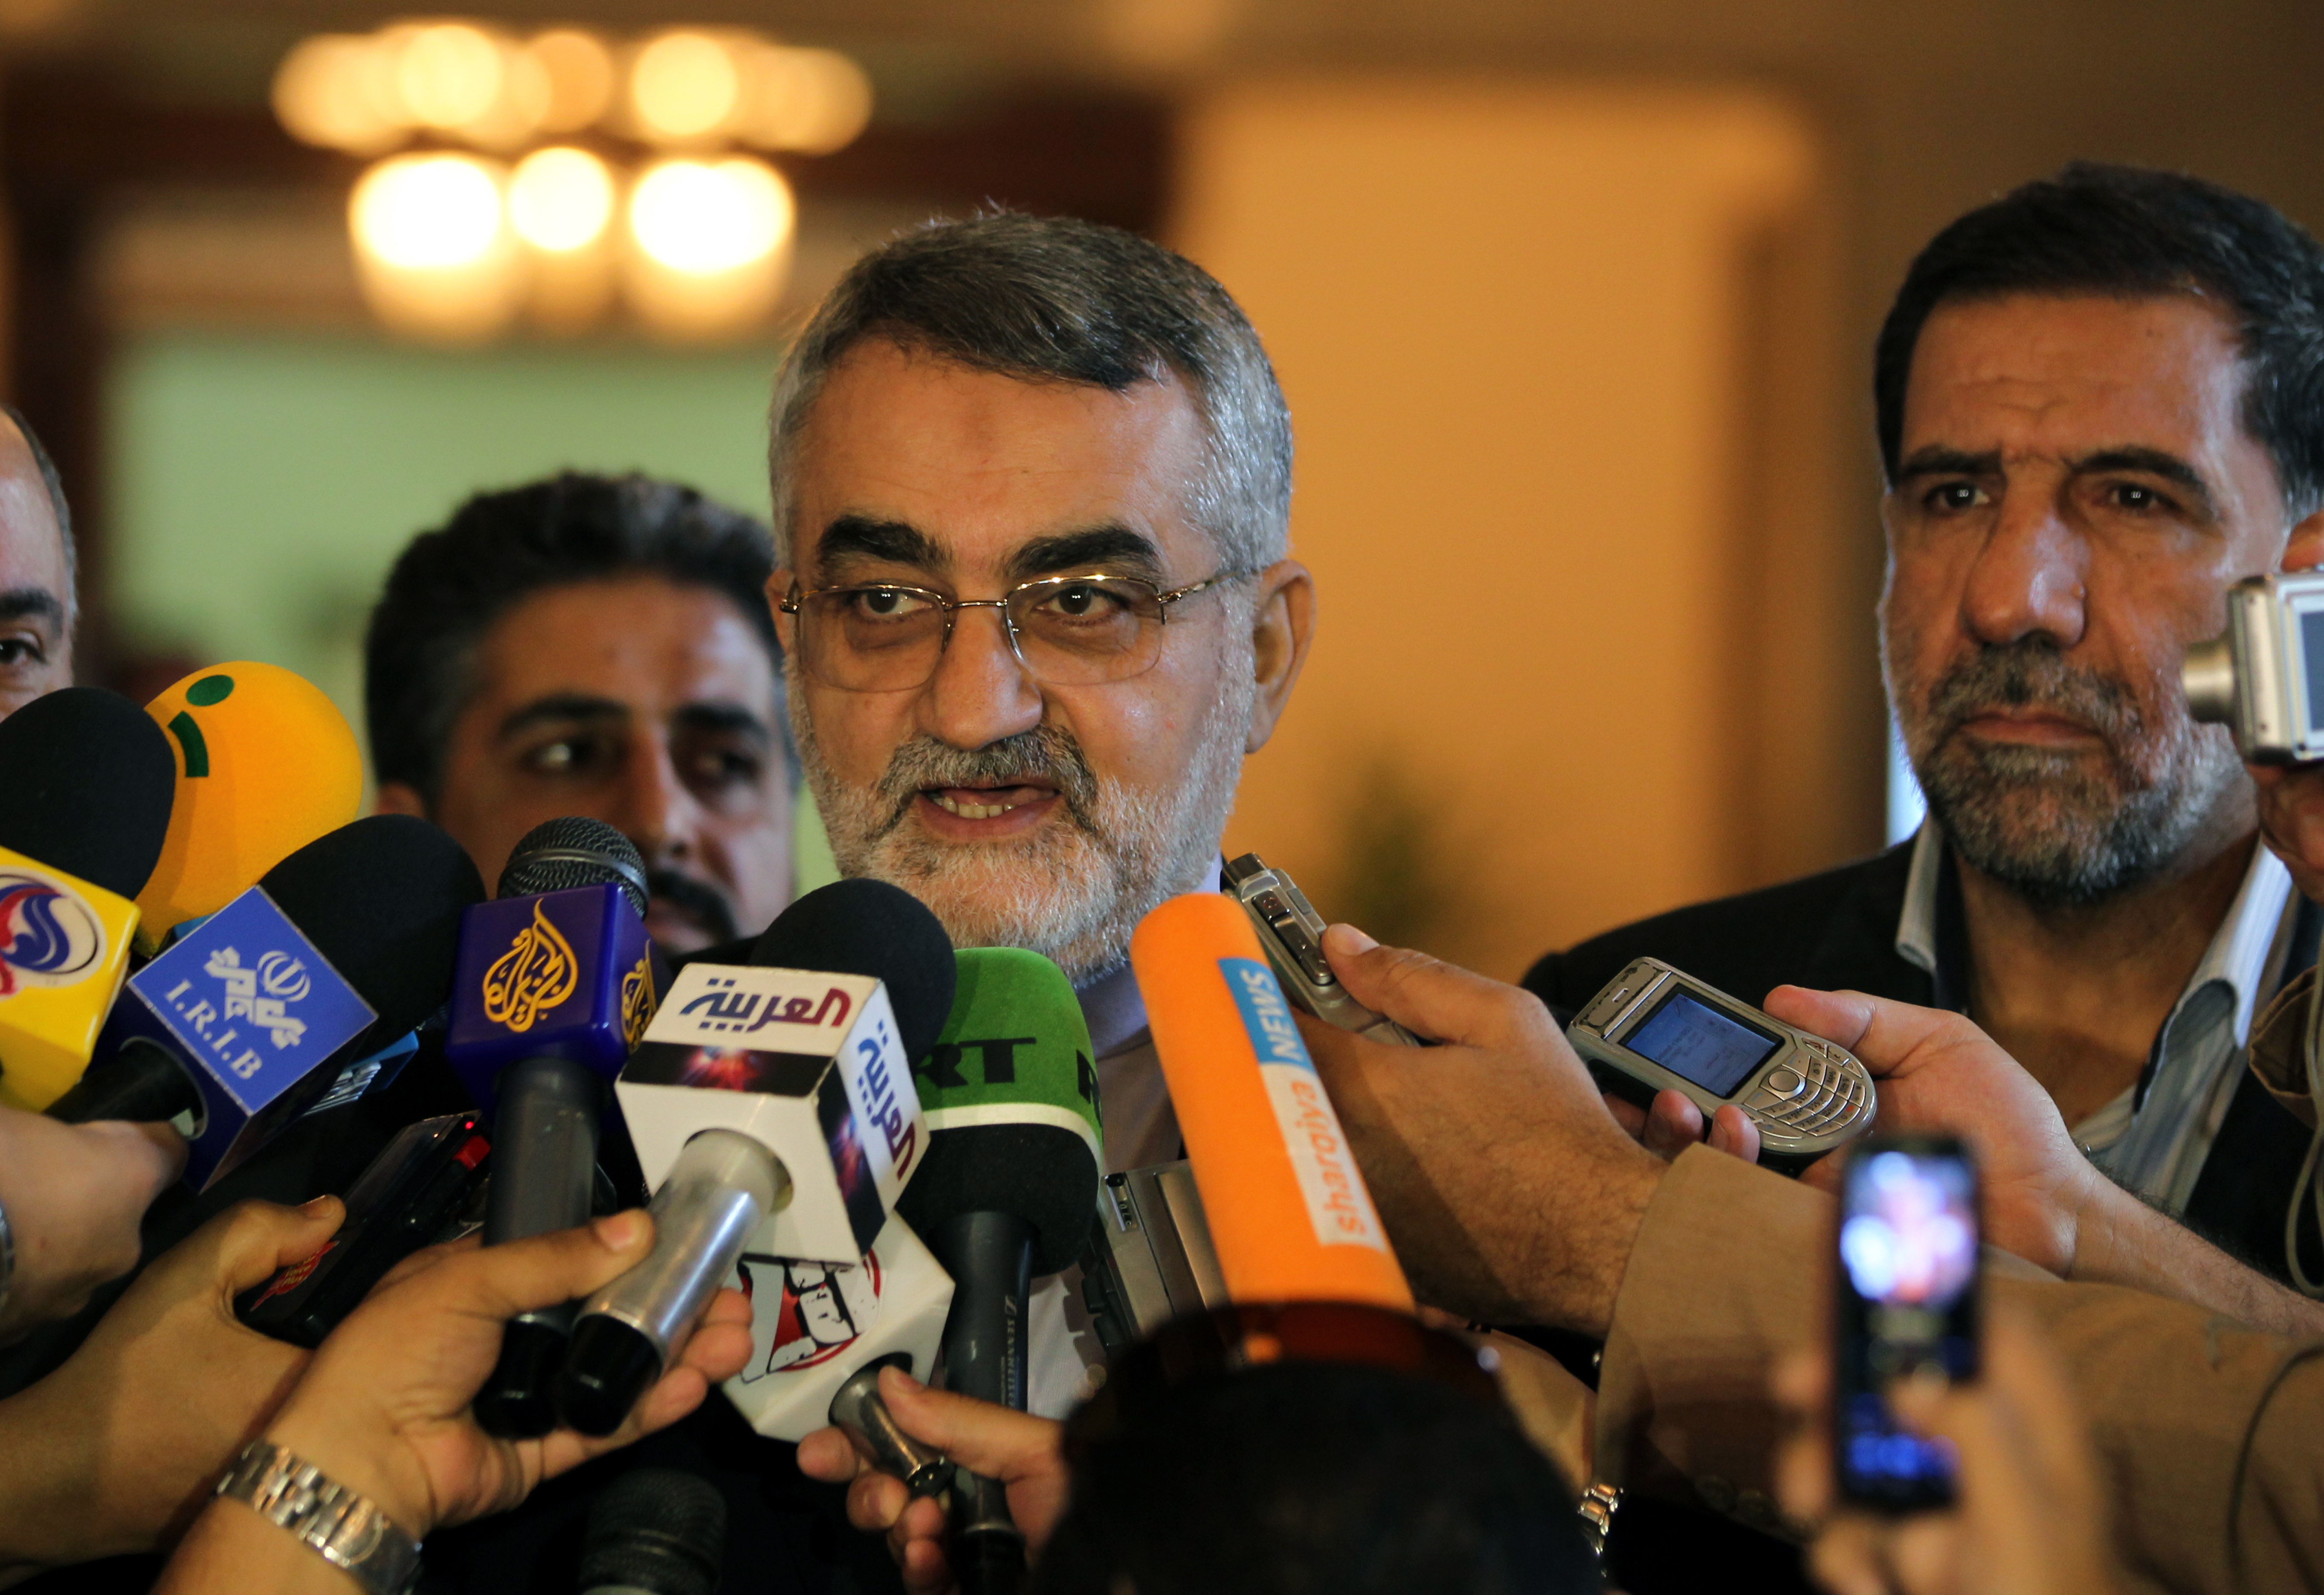 epa02860776 Alaeddin Boroujerdi the chairman of Iran's Islamic Consultative Assembly's National Security and Foreign Policy Committee speaks during a press conference following his meeting with Arab League  Secretary General Nabil Elaraby (not pictured) at the Arab League Headquarters in Cairo, Egypt, 09 August 2011. According to media reports, the visit is the first by a top Iranian official to Egypt since the 25 January revolution. Boroujerdi, who is also the special envoy for Iranian Speaker of Parliament Ali Larijani, will hold talks with Egyptian officials to invite them for a pro-Palestinian conference to take place in Tehran in October.  EPA/KHALED ELFIQI